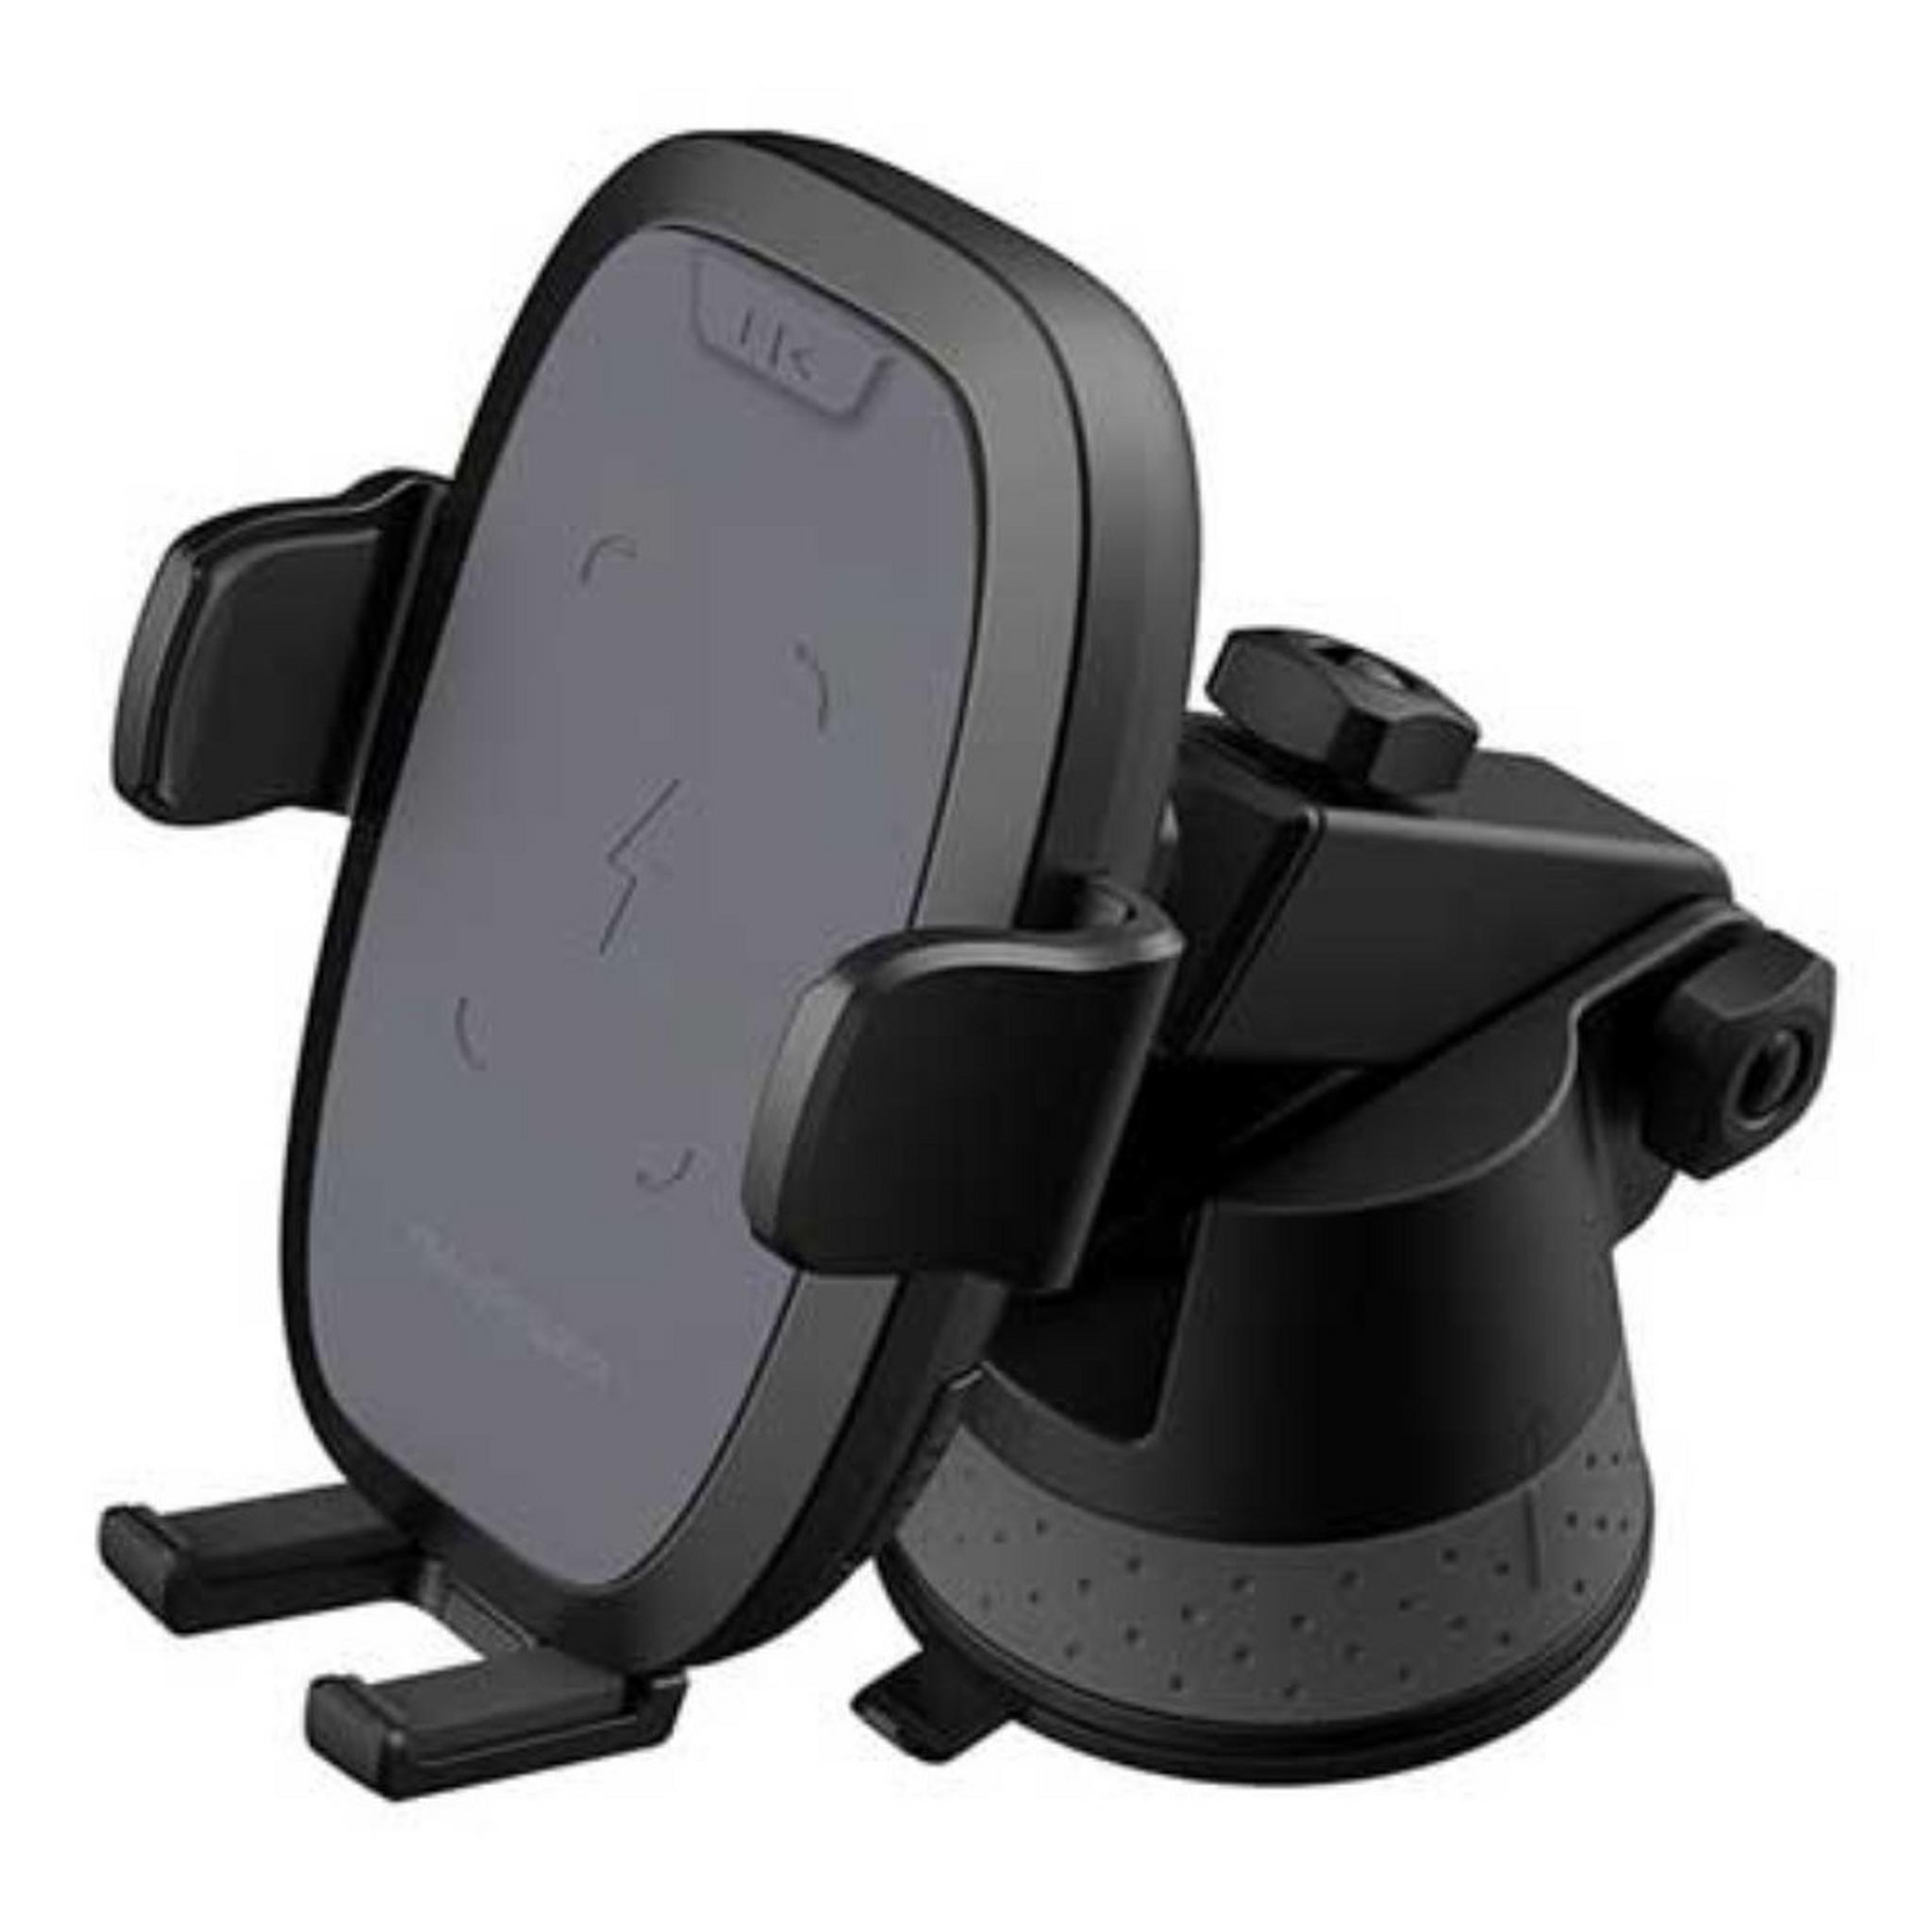 Ravpower Wireless Charging Car Holder with Suction Base 10W/7.5W/5W